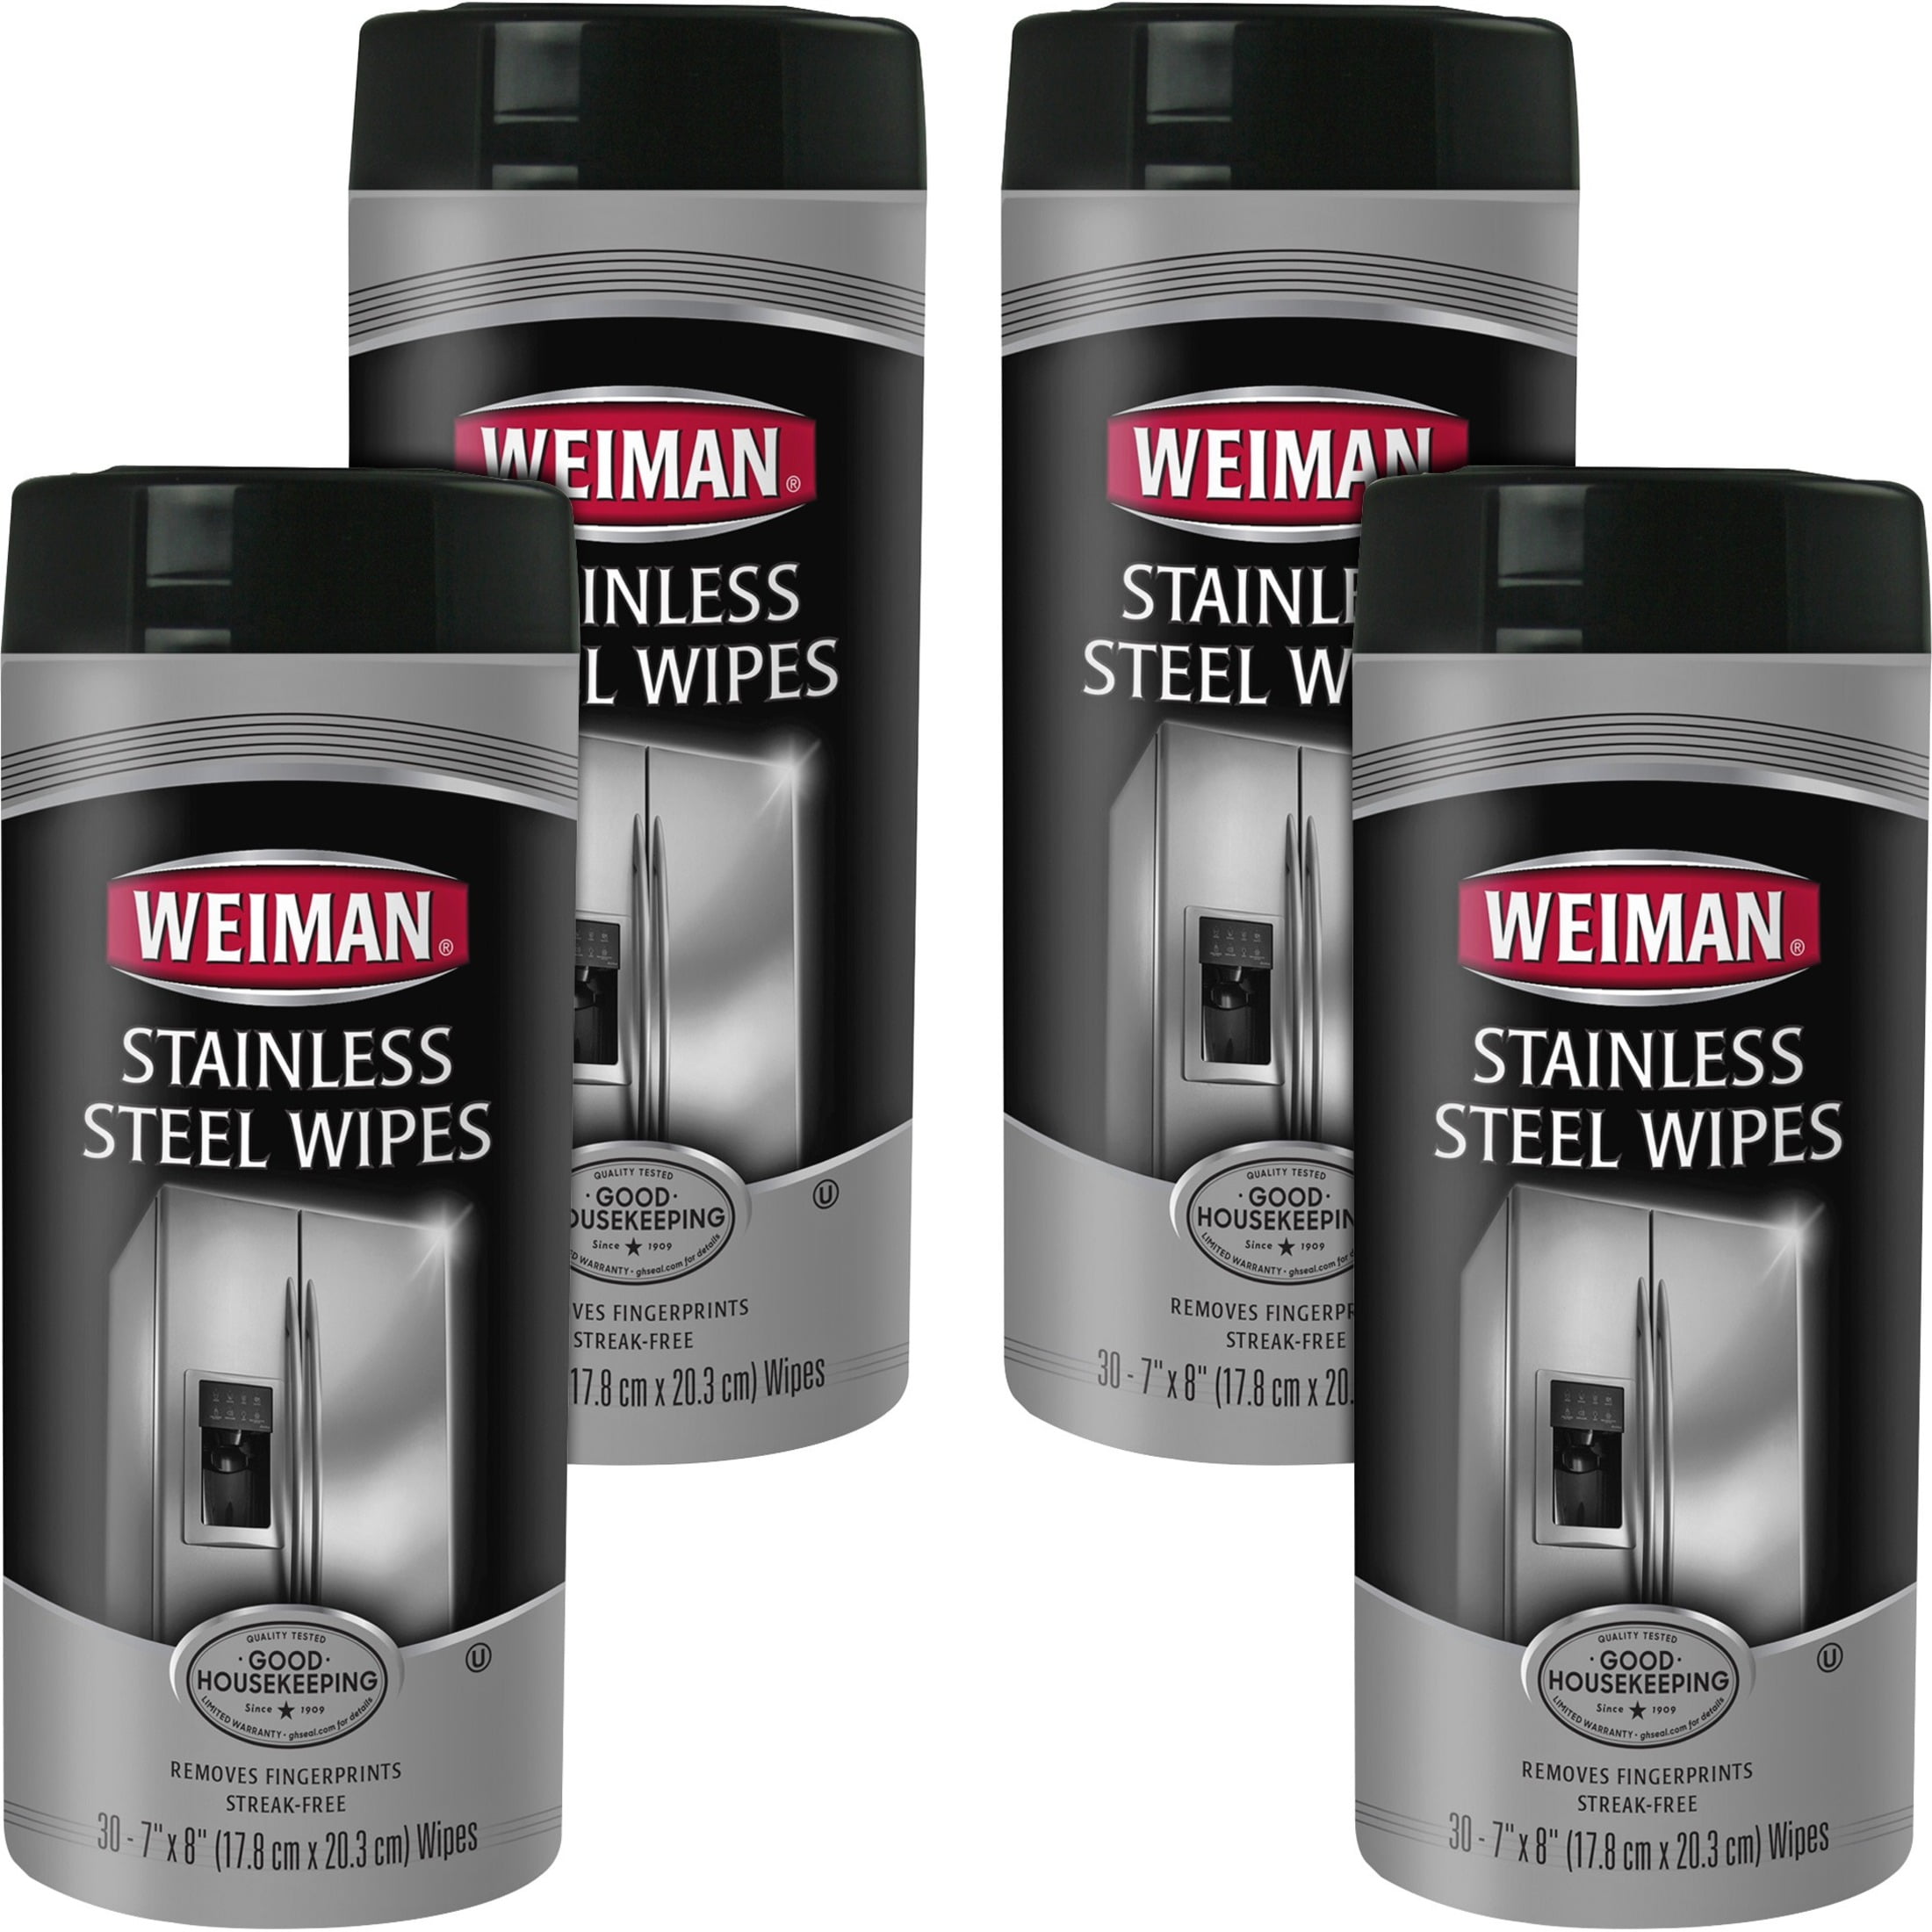 WMN92CT - $25.98 - Stainless Steel Wipes 7 x 8 30 Canister 4